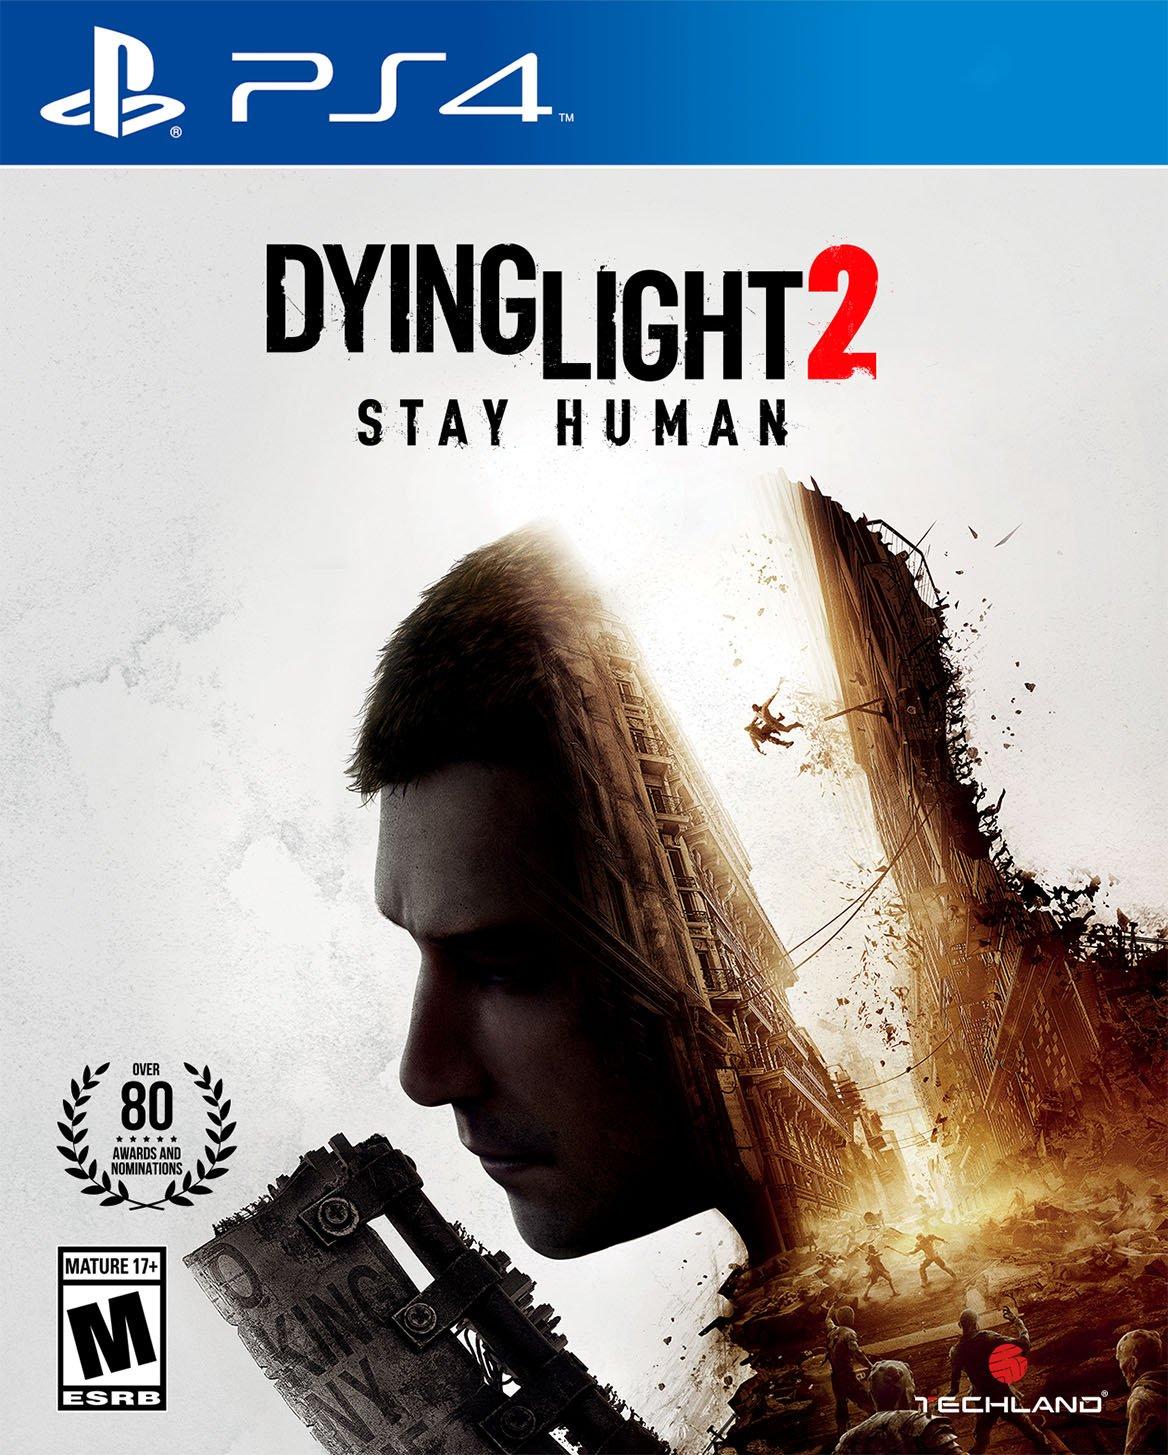 Dying Light 2 - PlayStation 4, Pre-Owned -  Square Enix, 662248924816